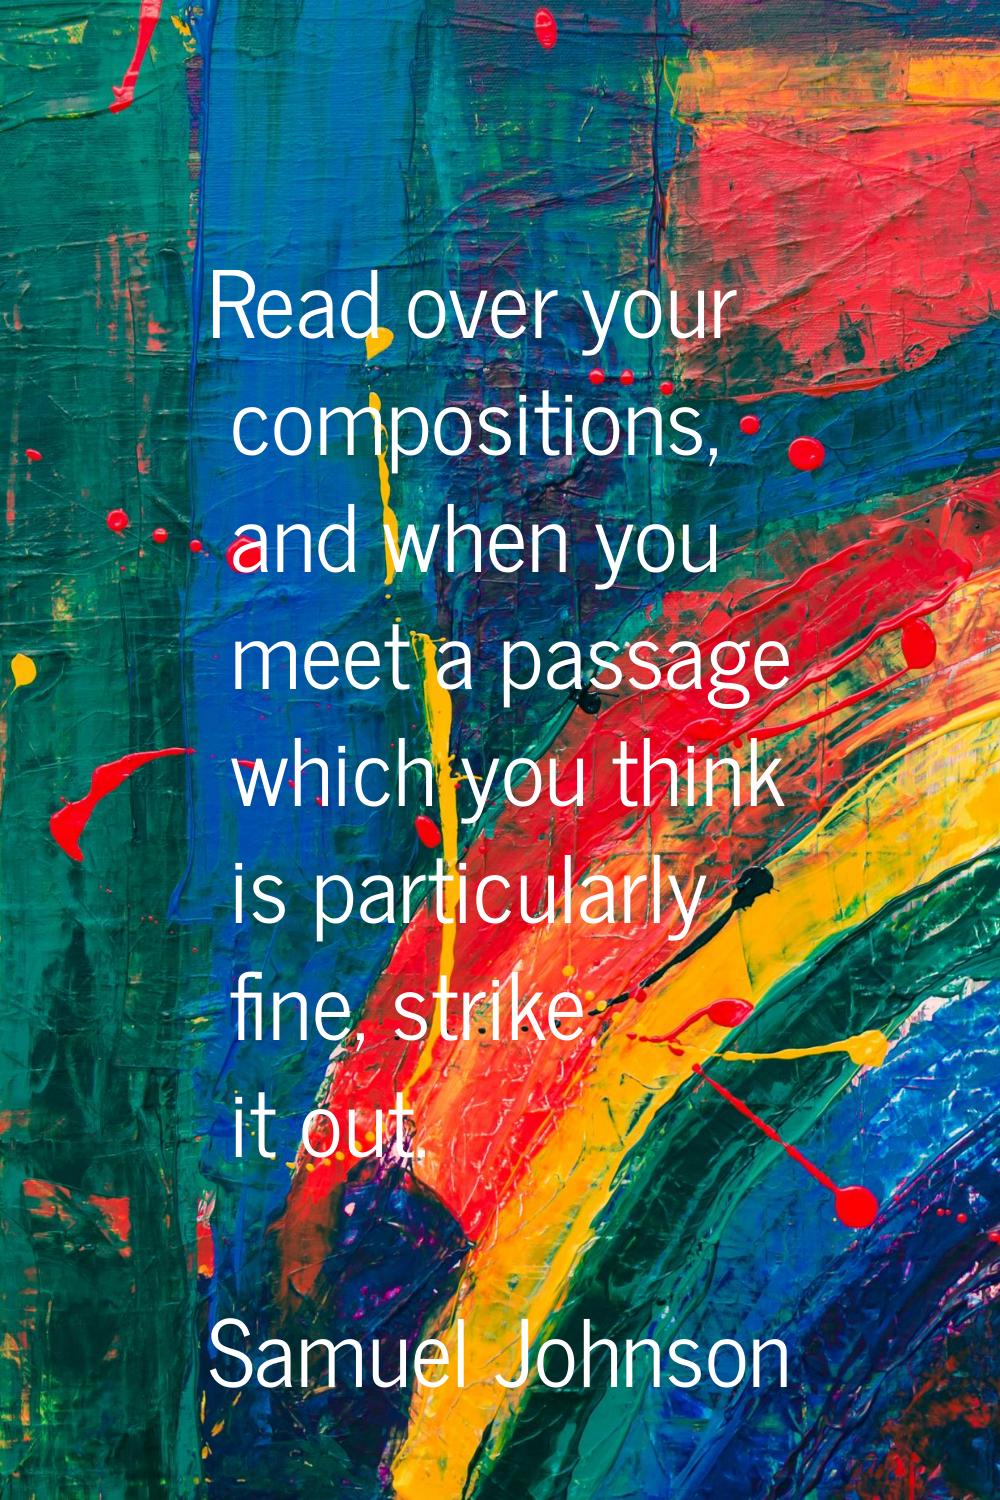 Read over your compositions, and when you meet a passage which you think is particularly fine, stri